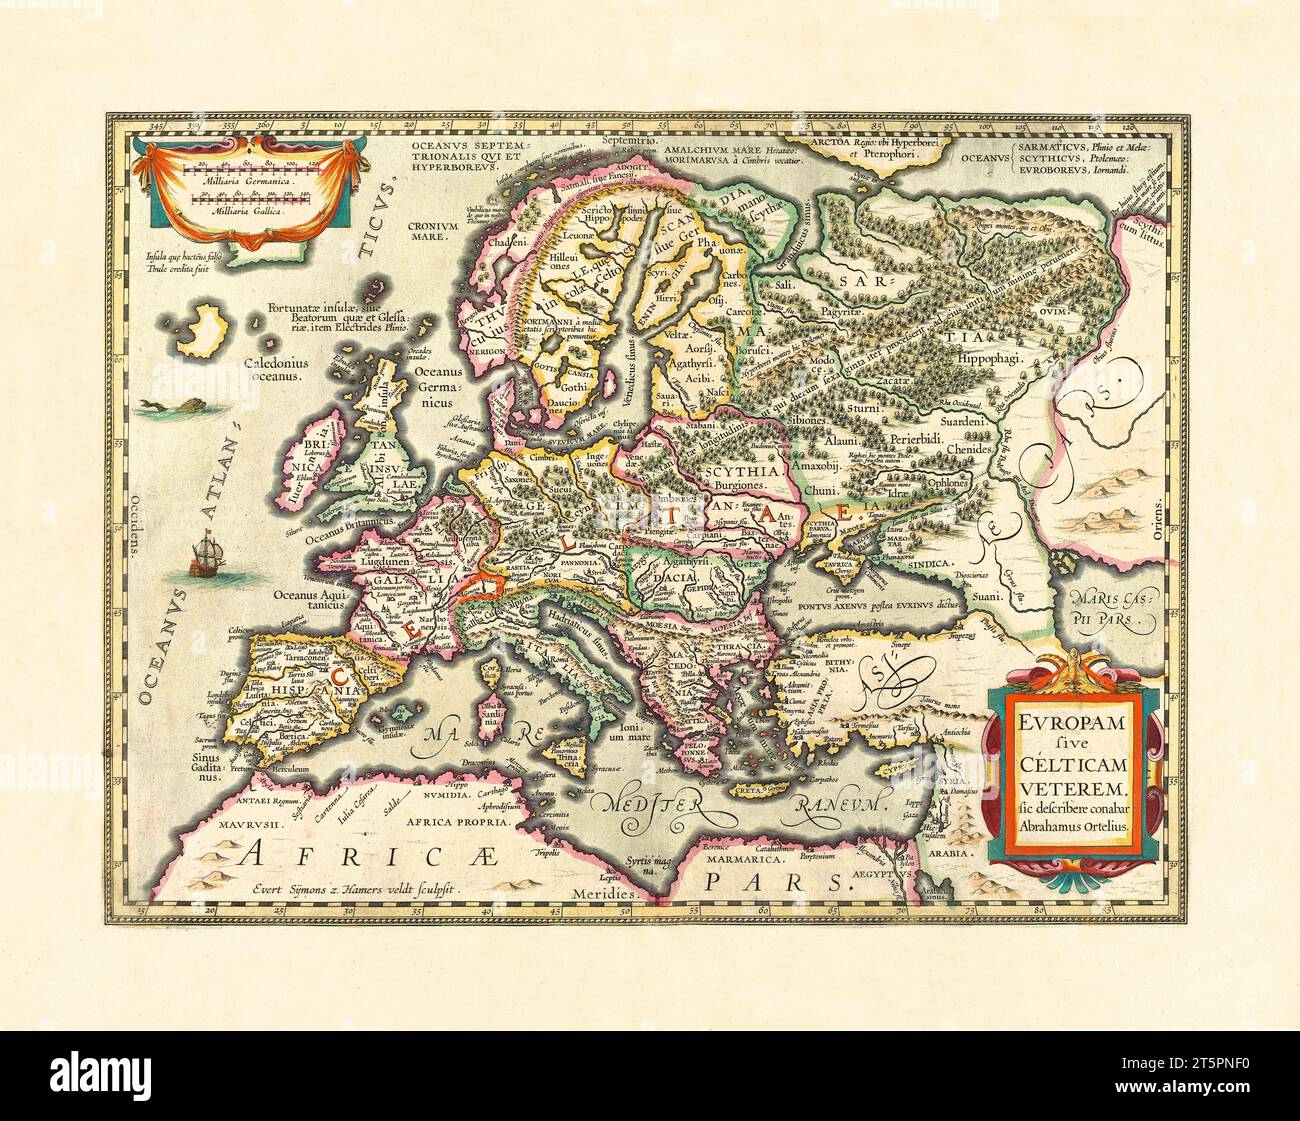 Old map of Europe. By Houndius, publ. ca. 1638 Stock Photo